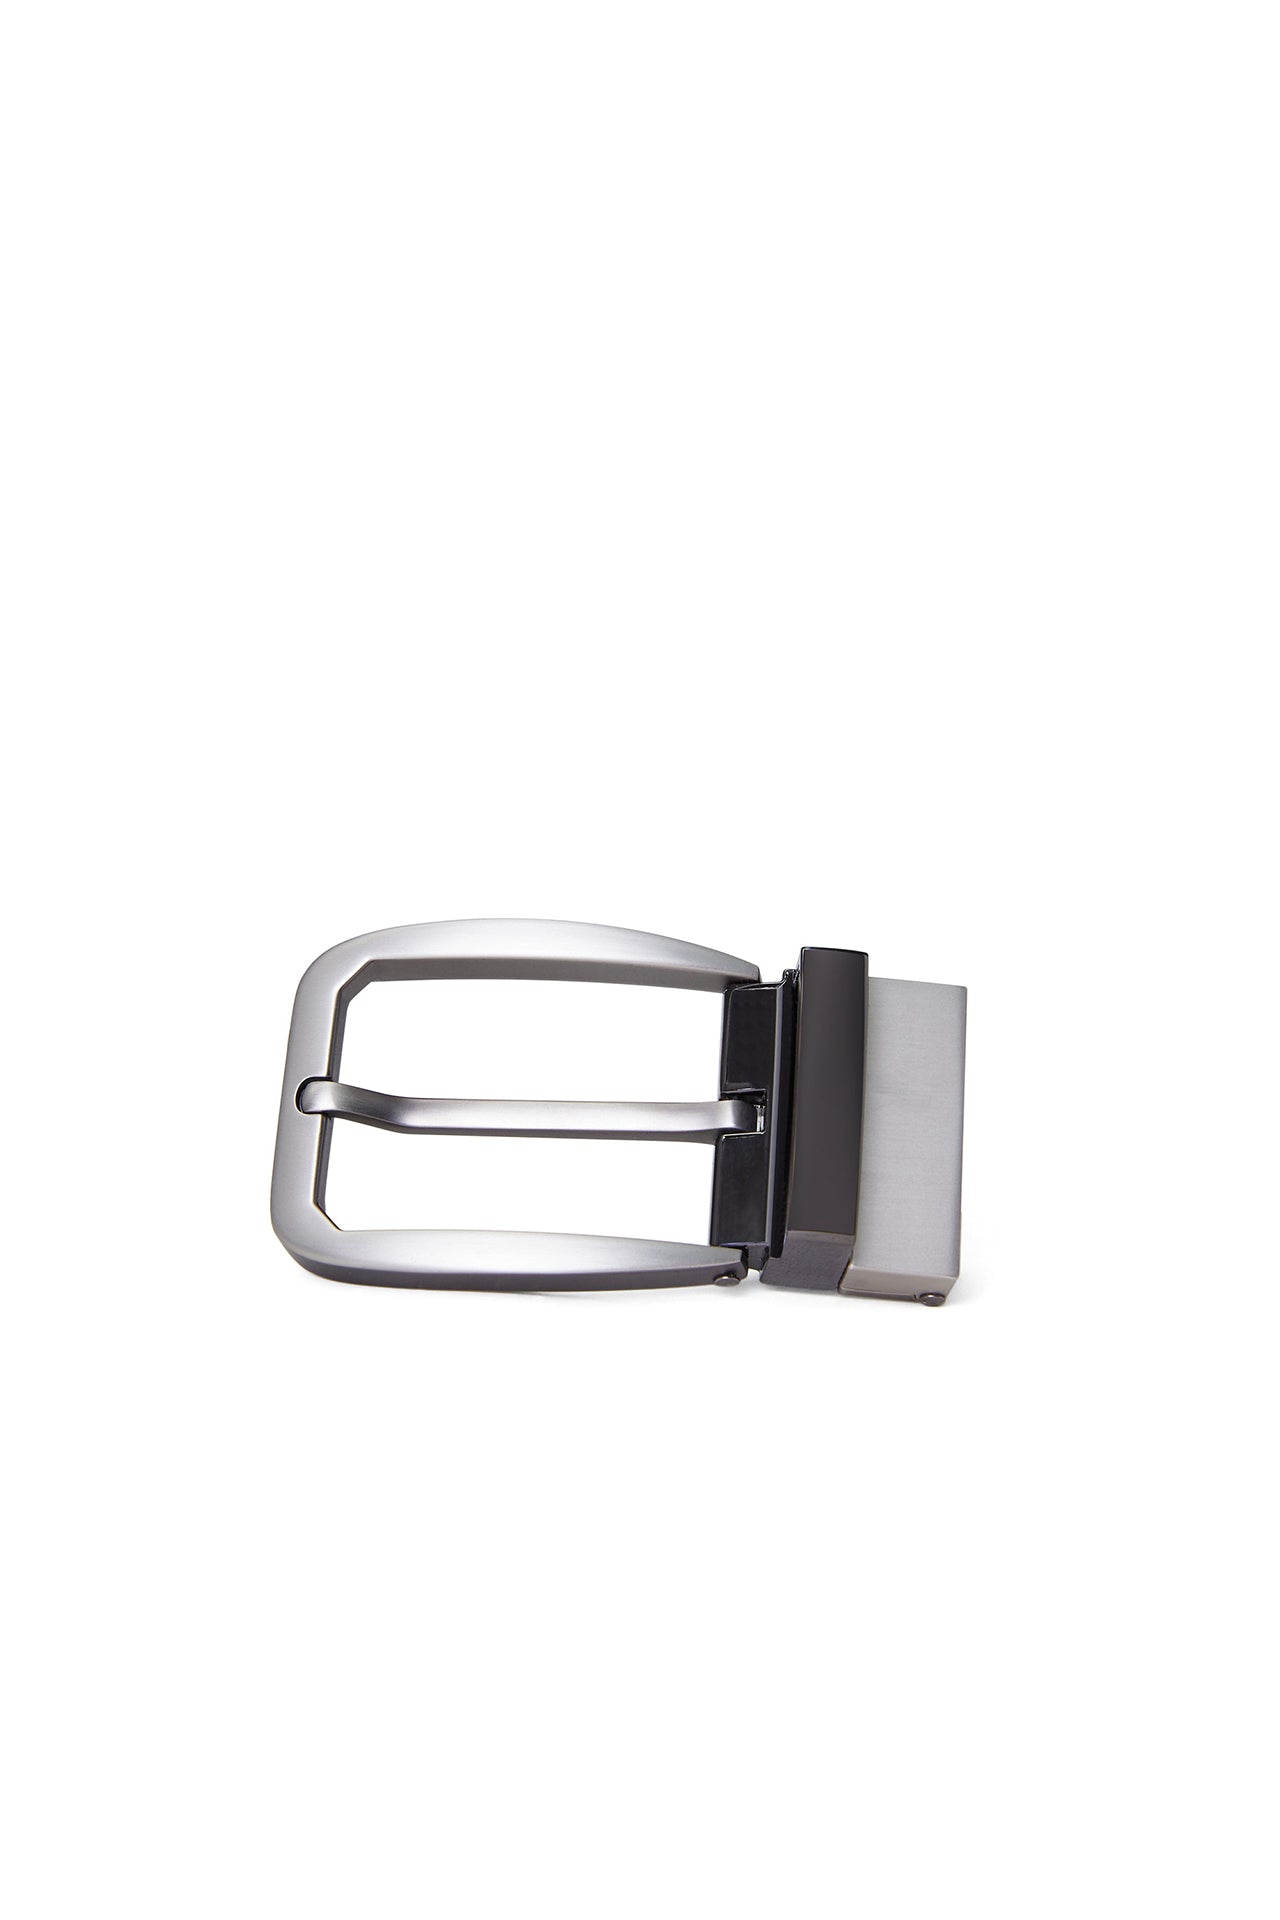 35mm Needle Buckle [Without Strap]